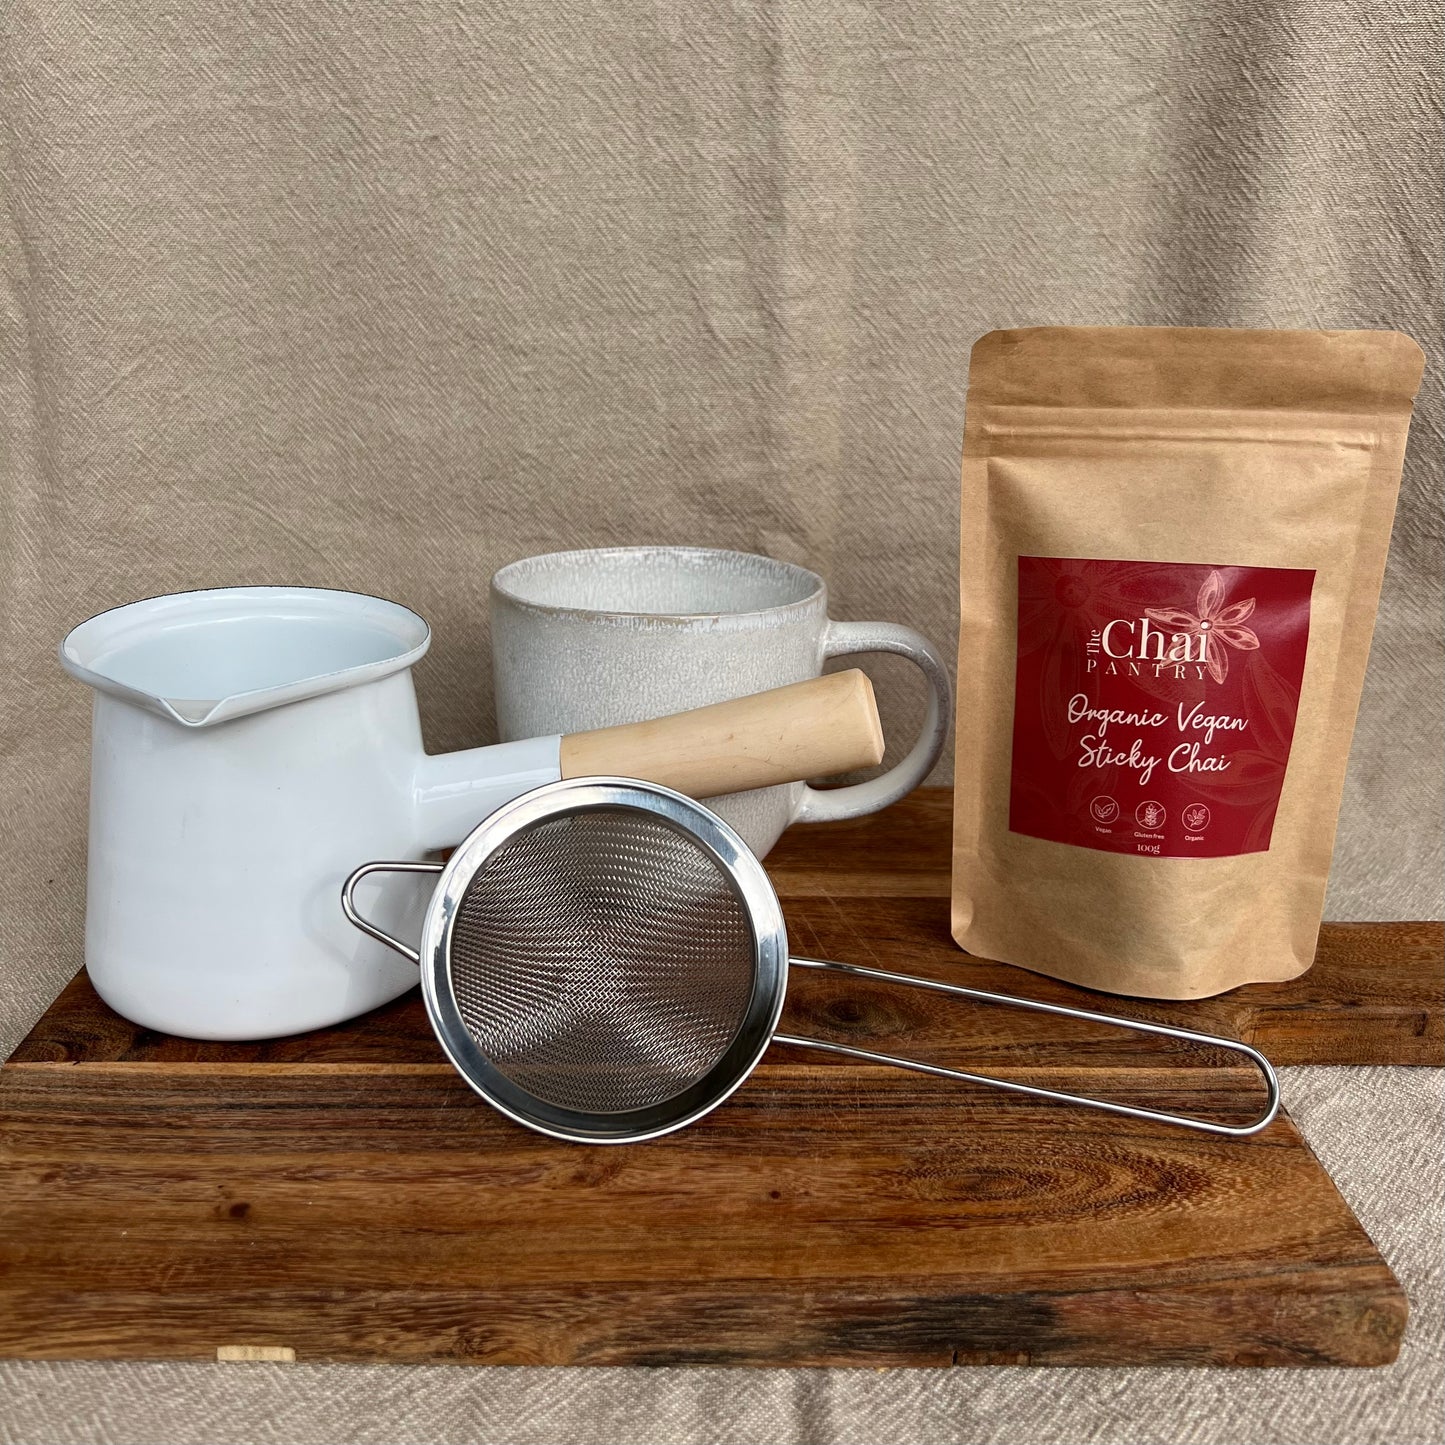 The Chai Pantry Brewers Set